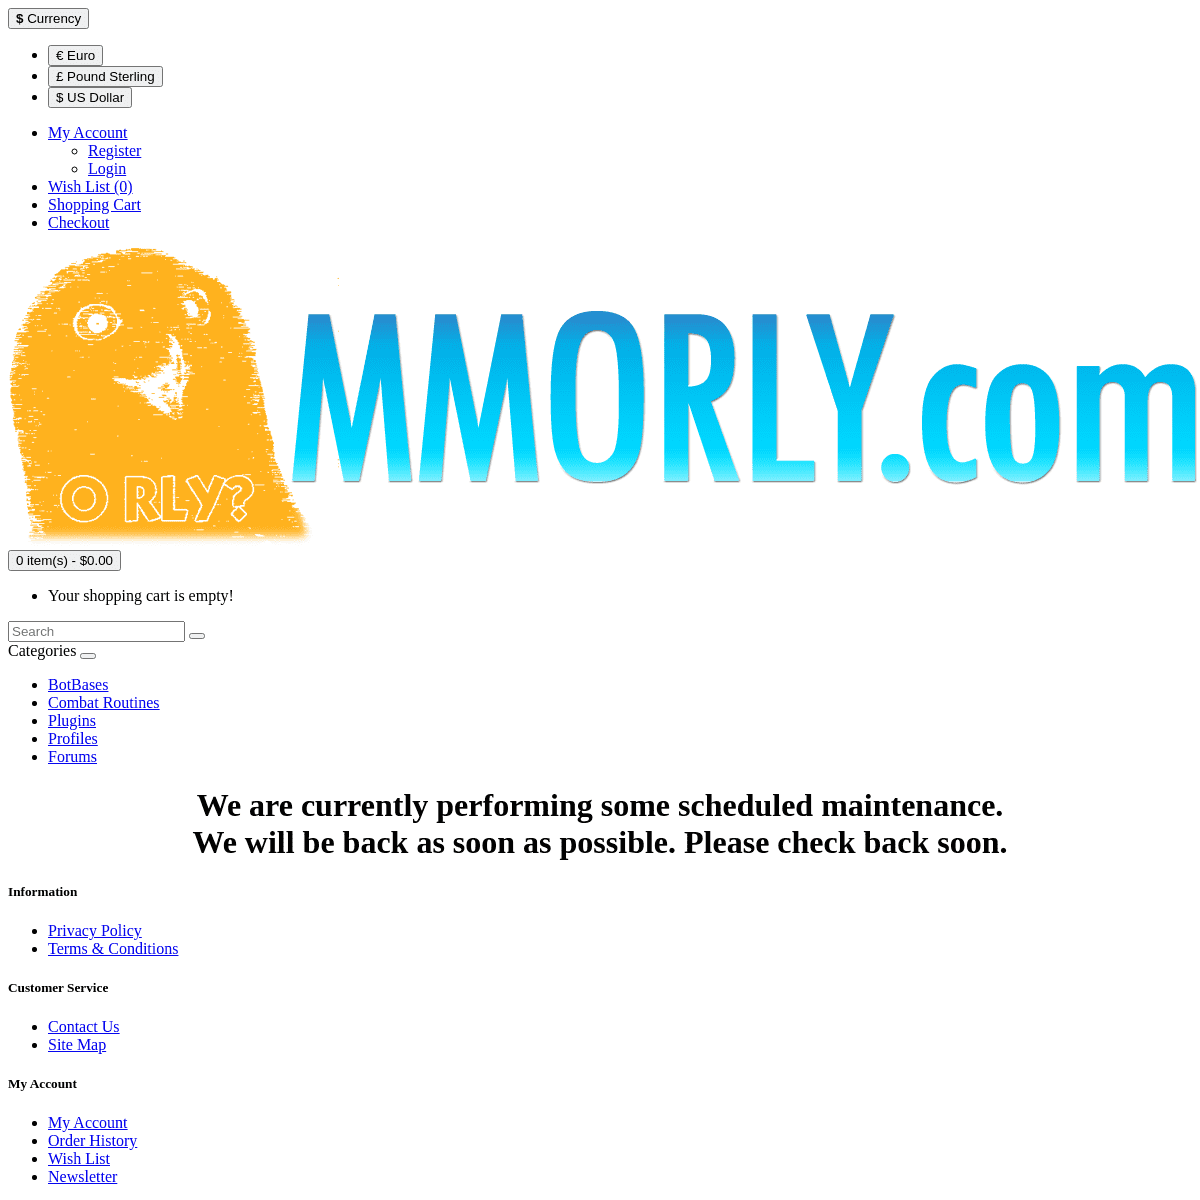 A complete backup of https://mmorly.com